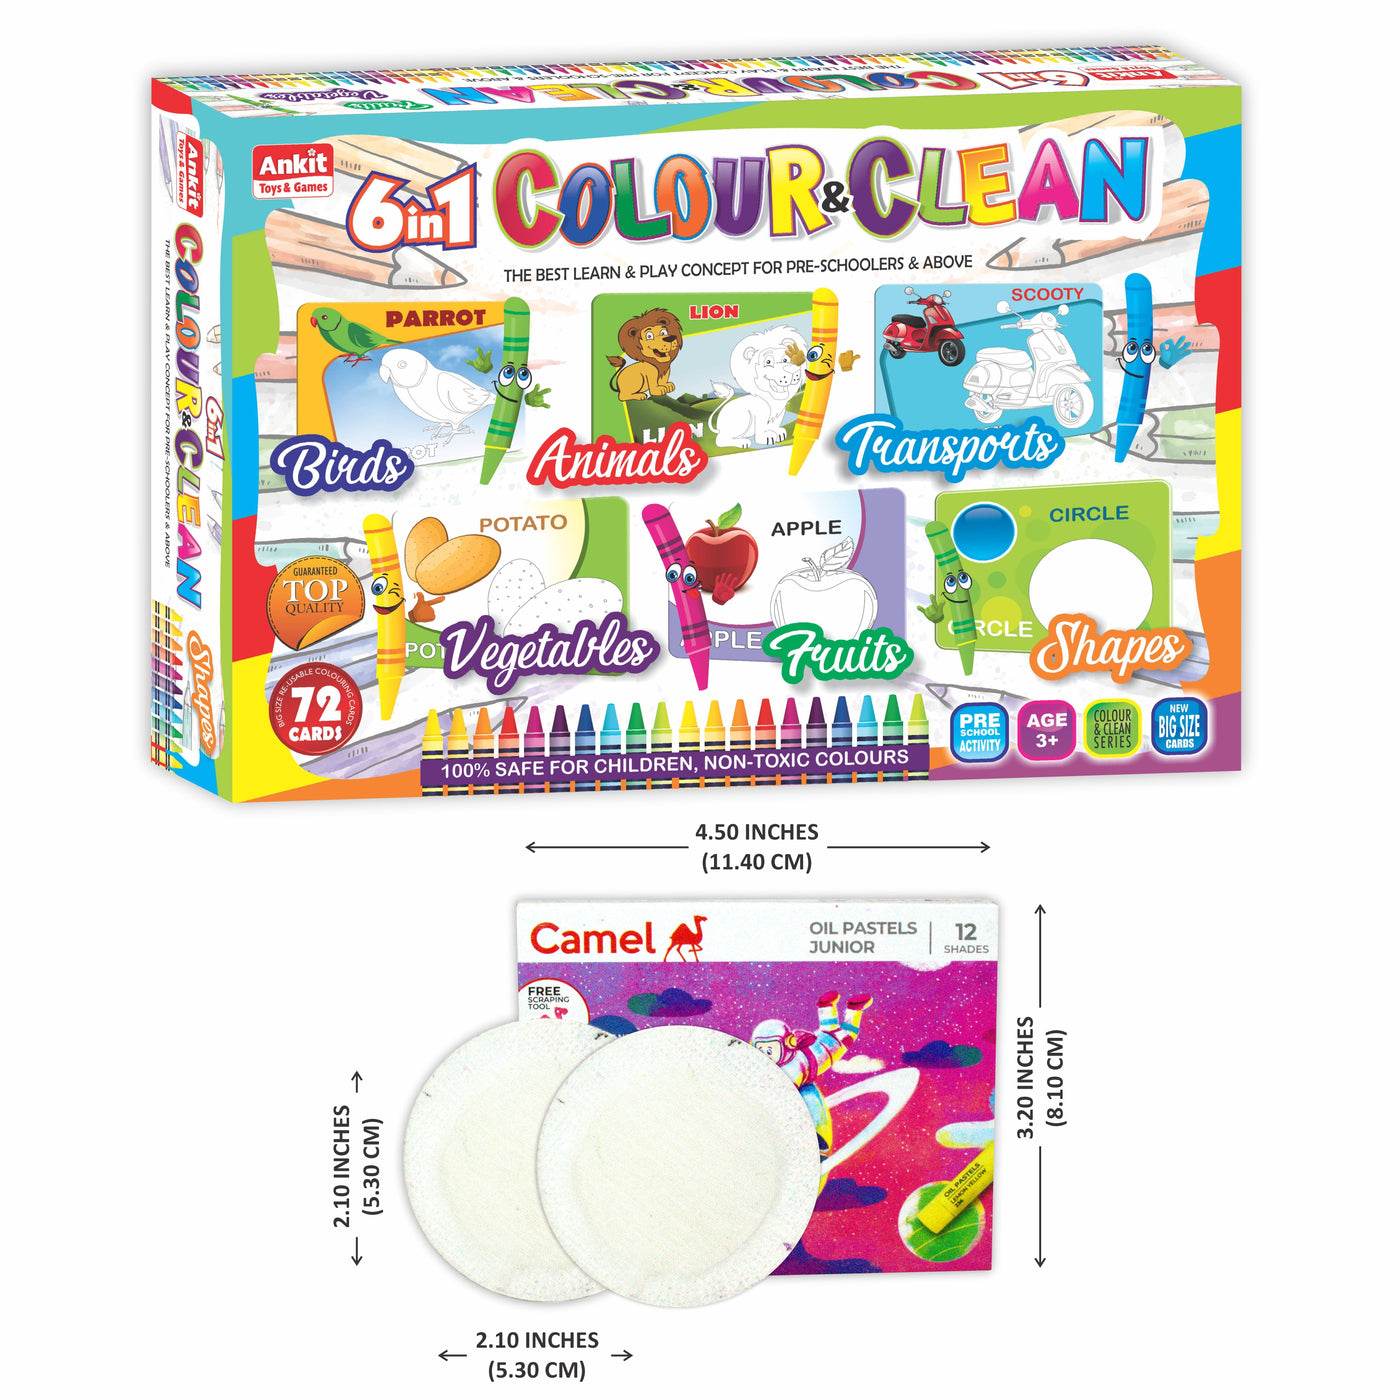 6 in 1 Colour & Clean Coloring Game